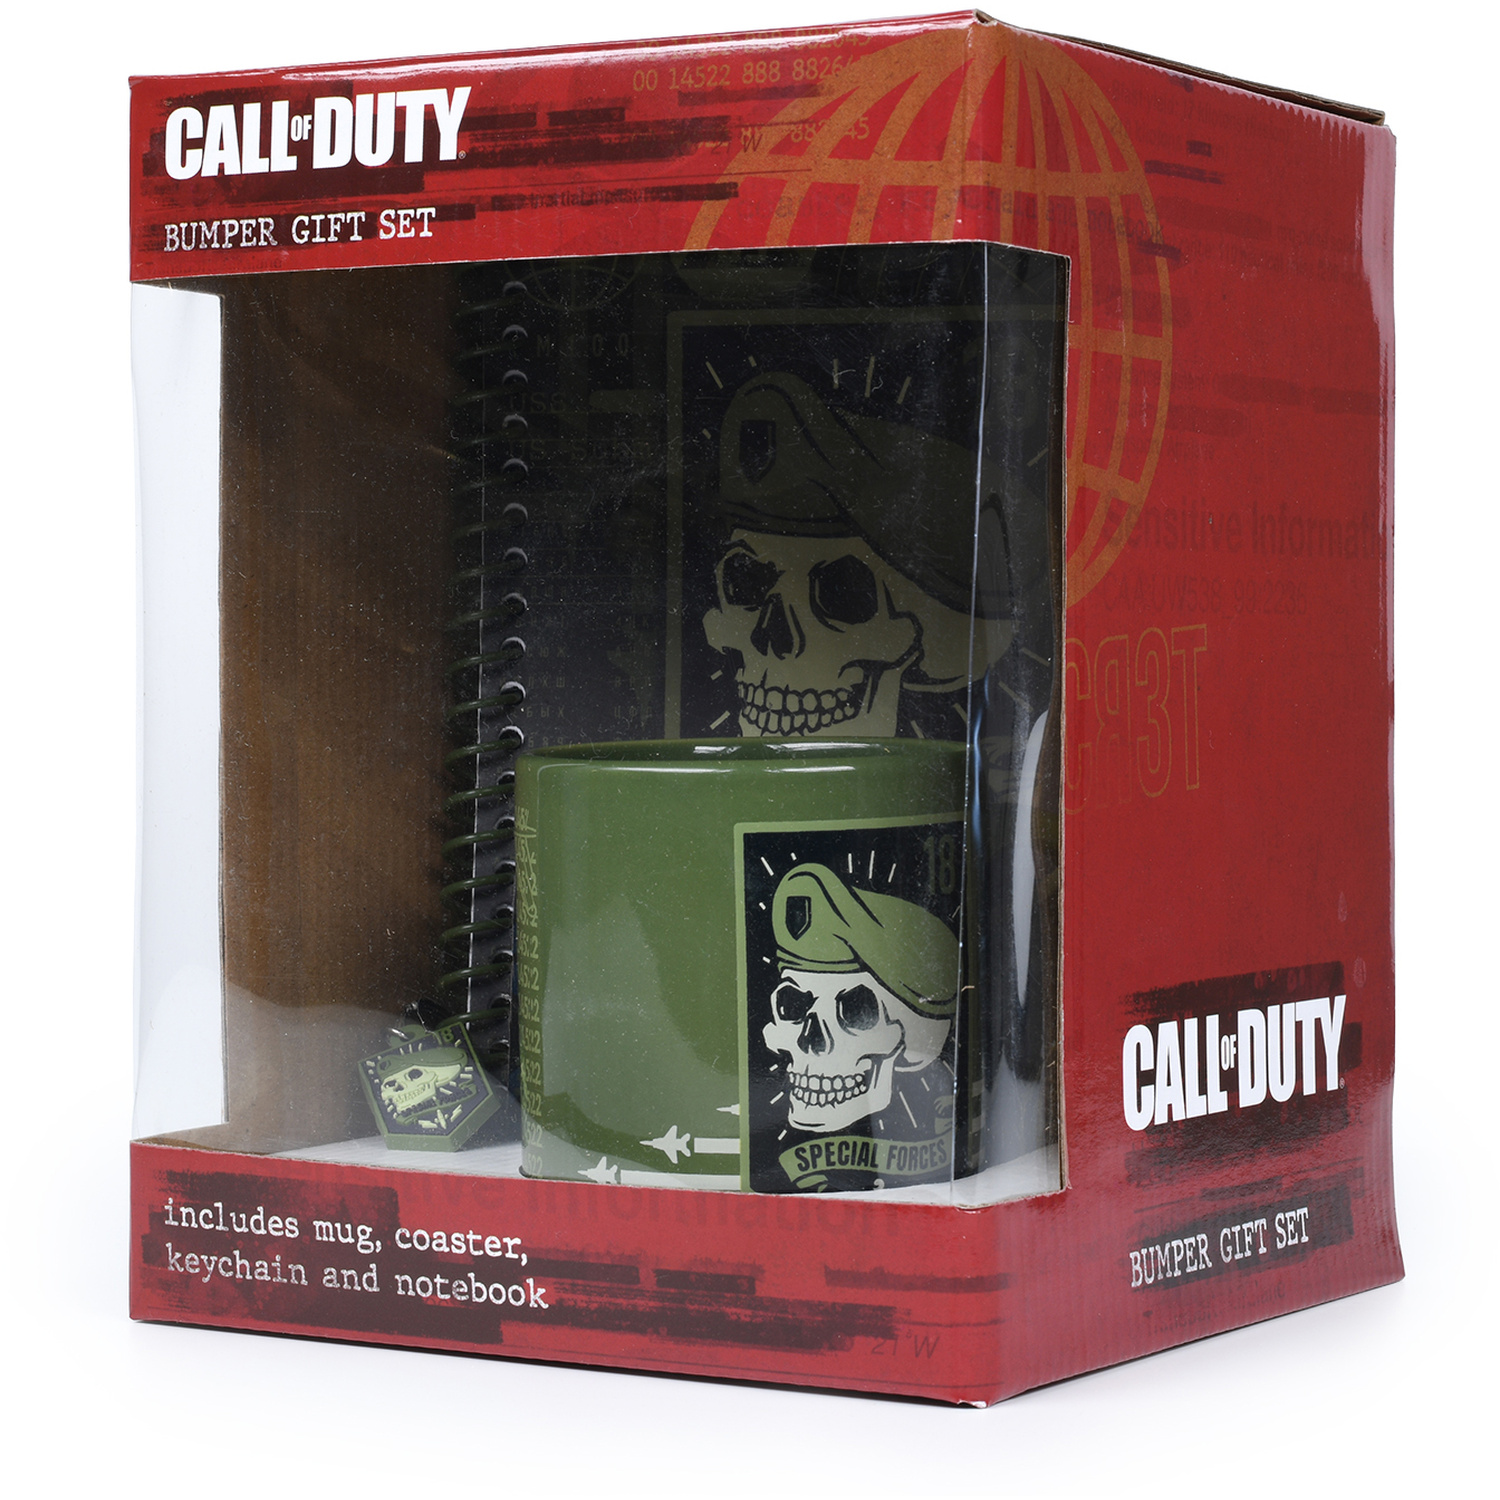 Call Of Duty Bumper Gift Set Image 2